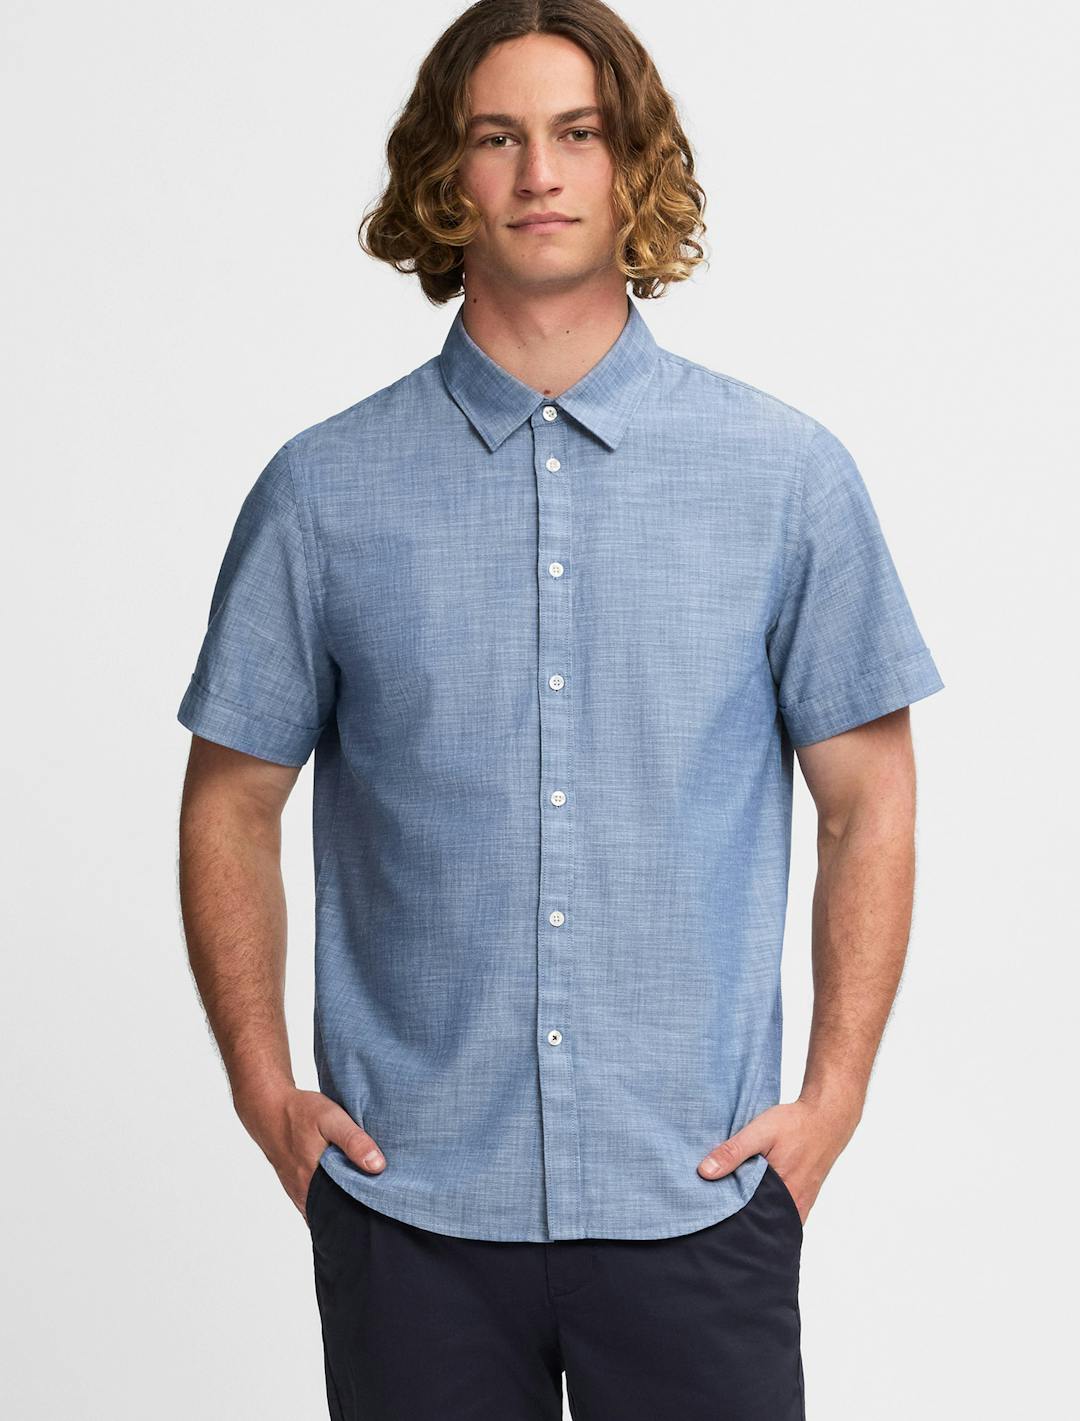 Fred Shirt in Chambray Blue